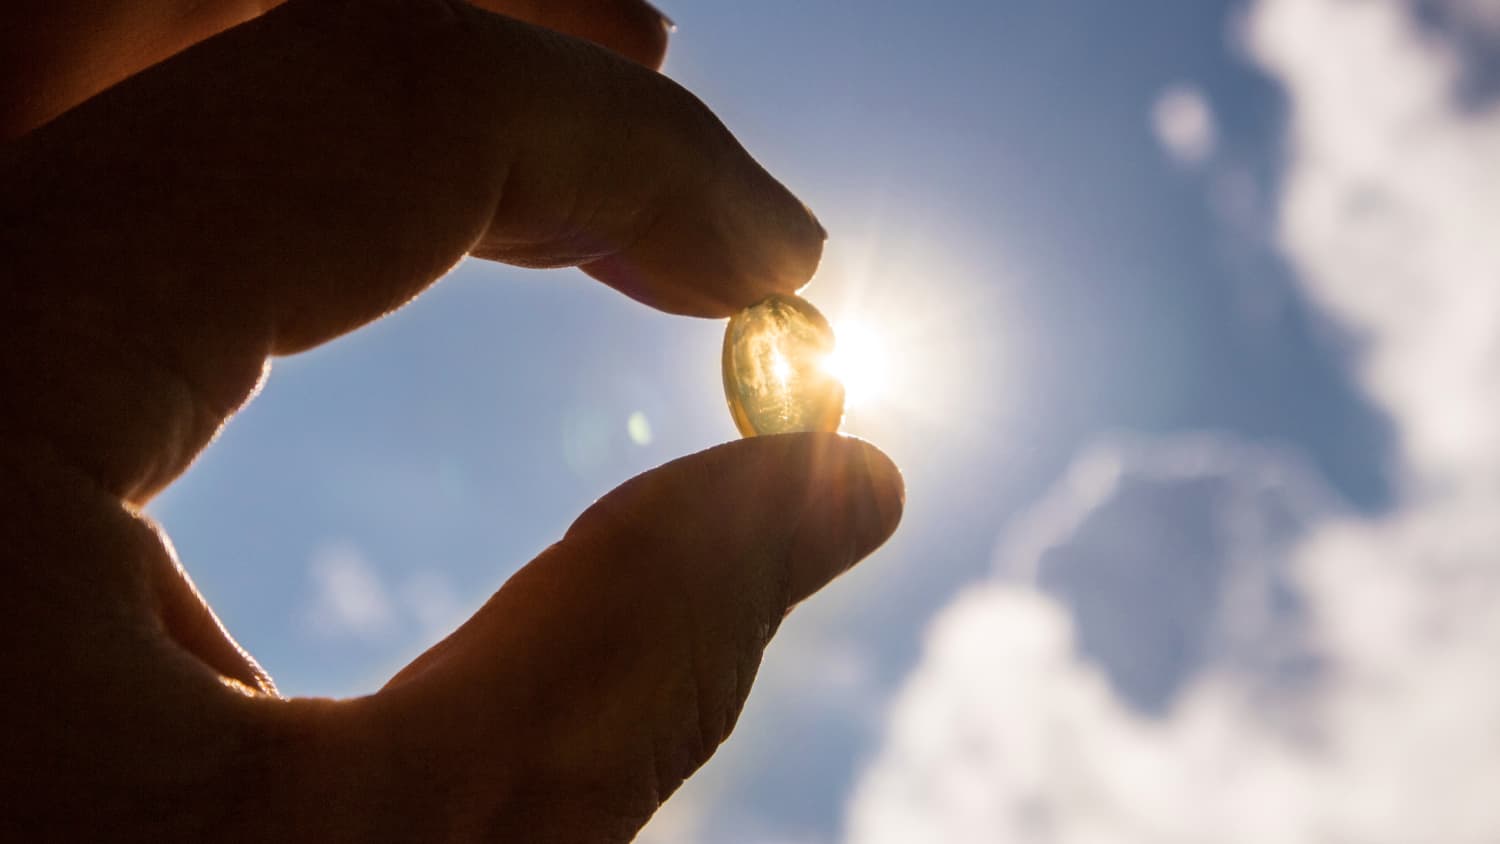 vitamin D, discussed as a possible link to COVID-19